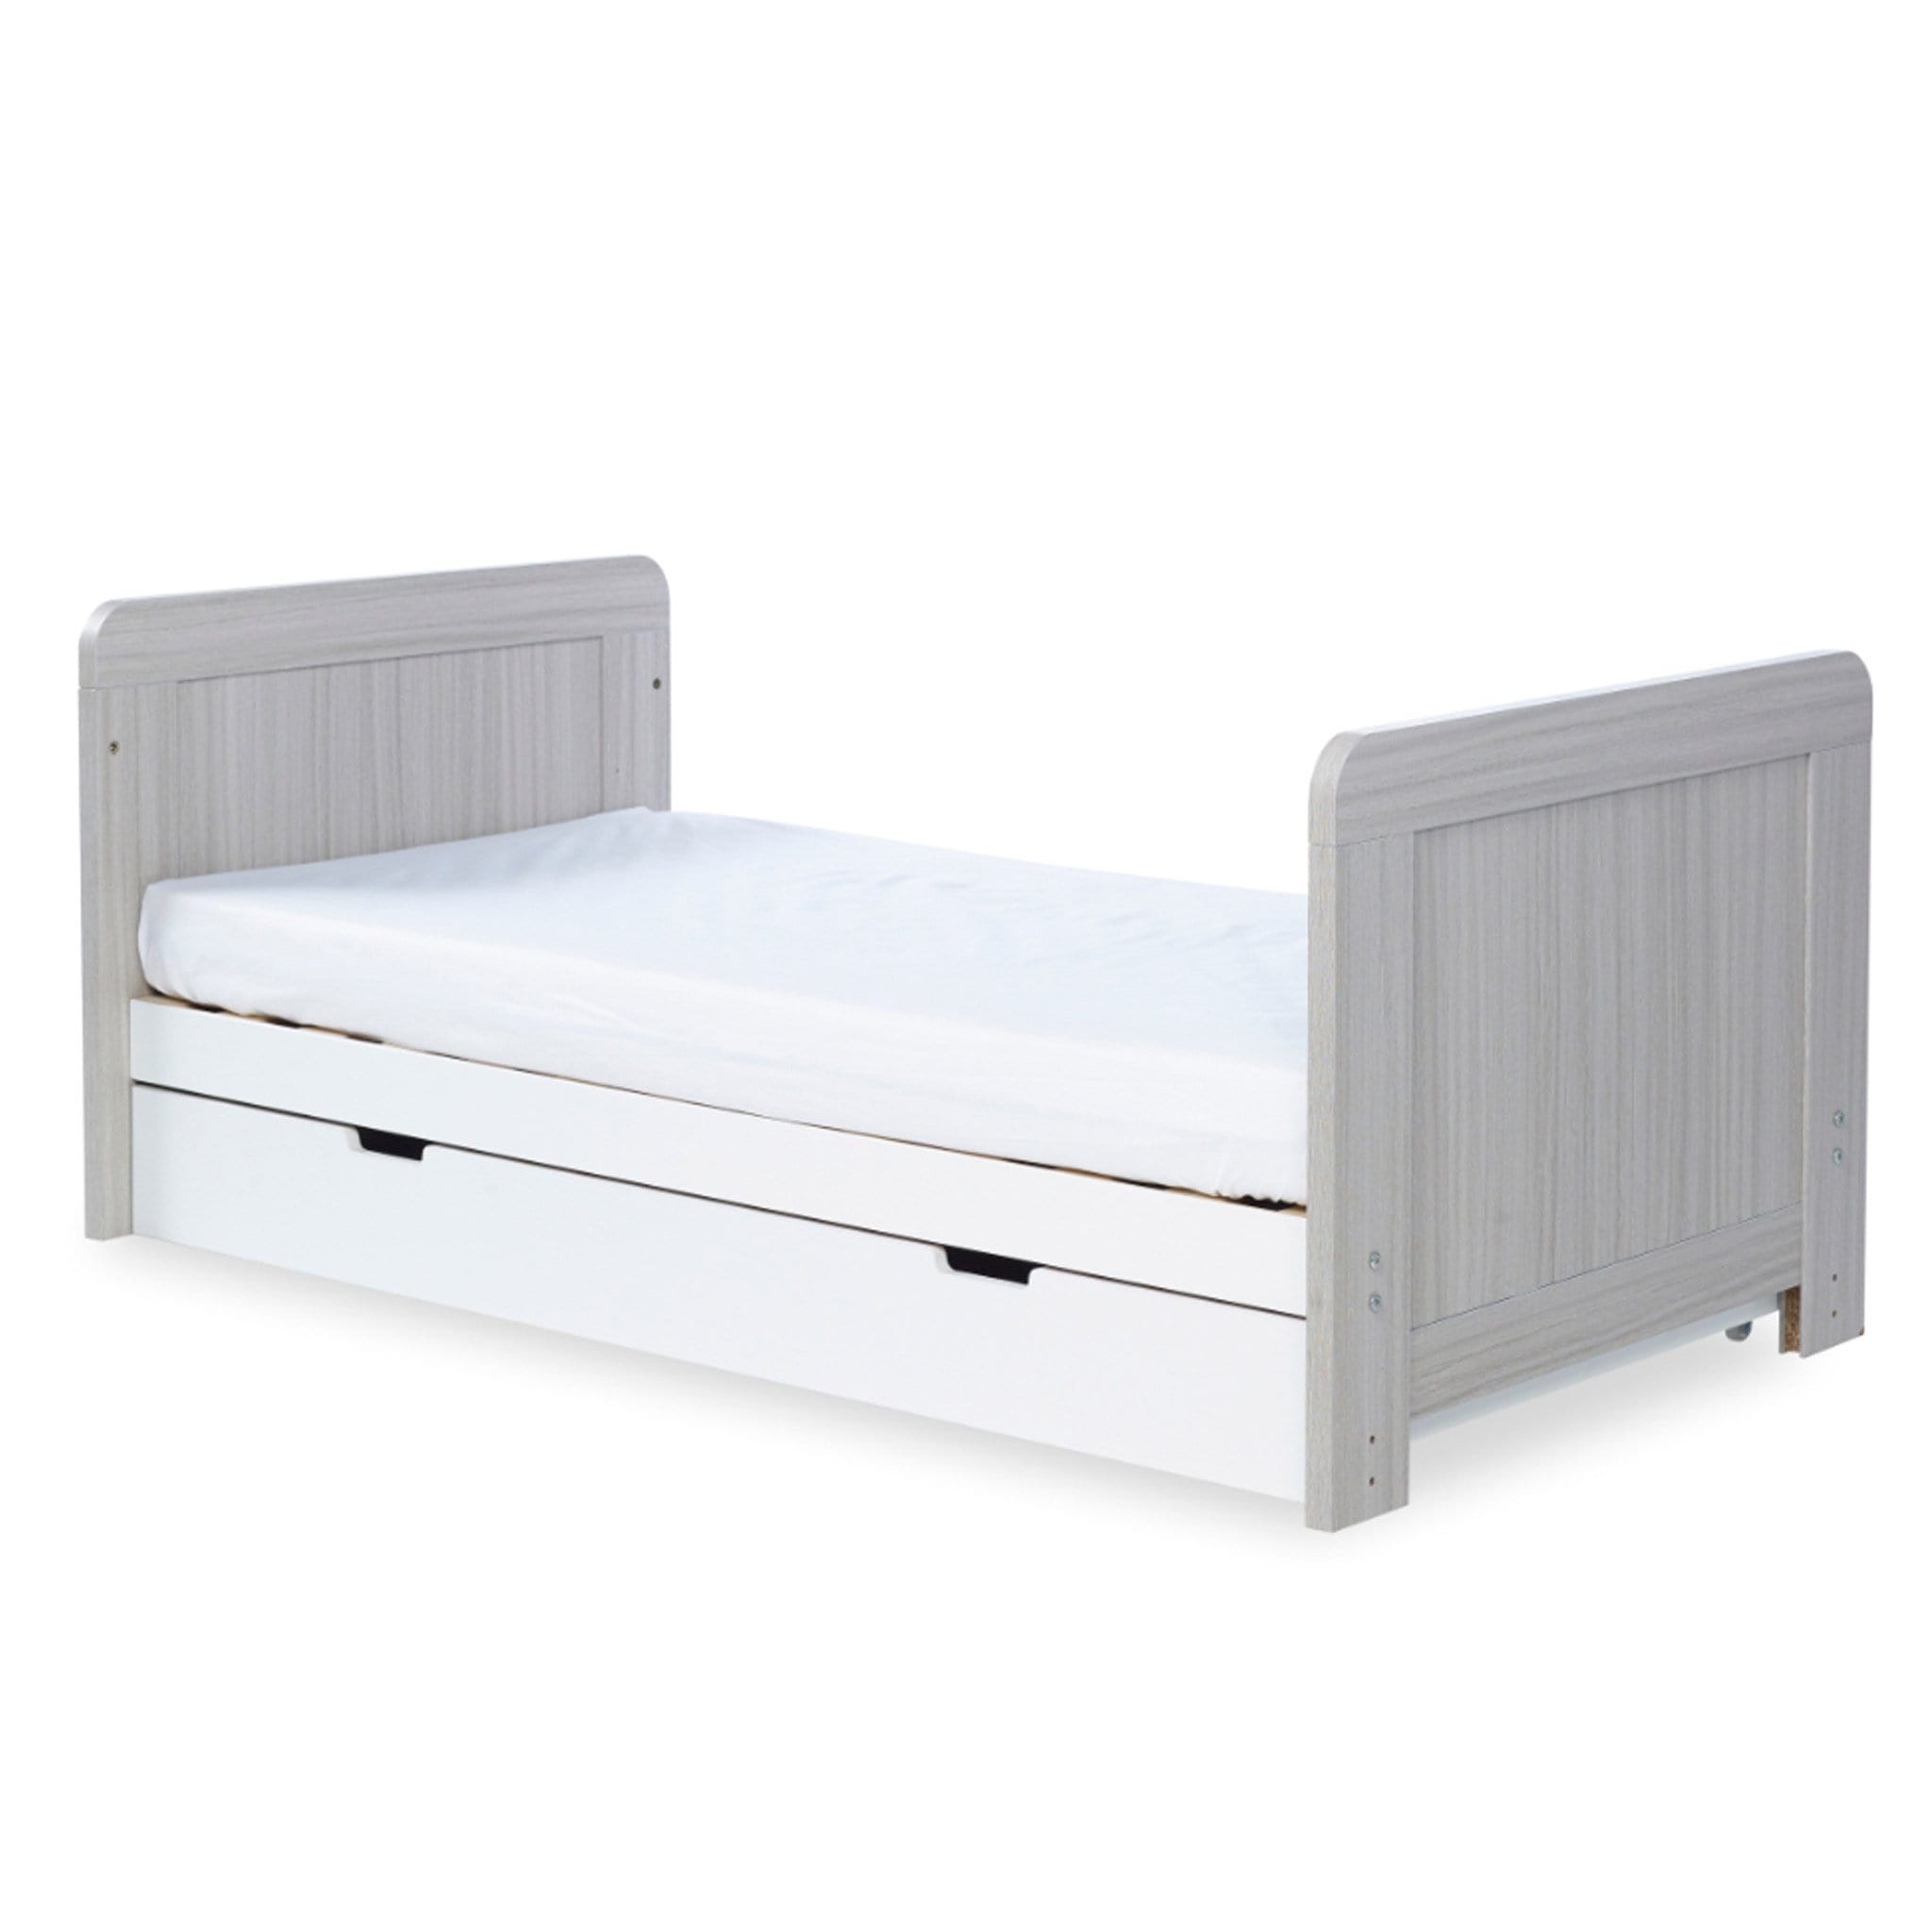 Ickle Bubba Pembrey Cot Bed, Under Drawer and Changing Unit Ash Grey & White Cot Beds